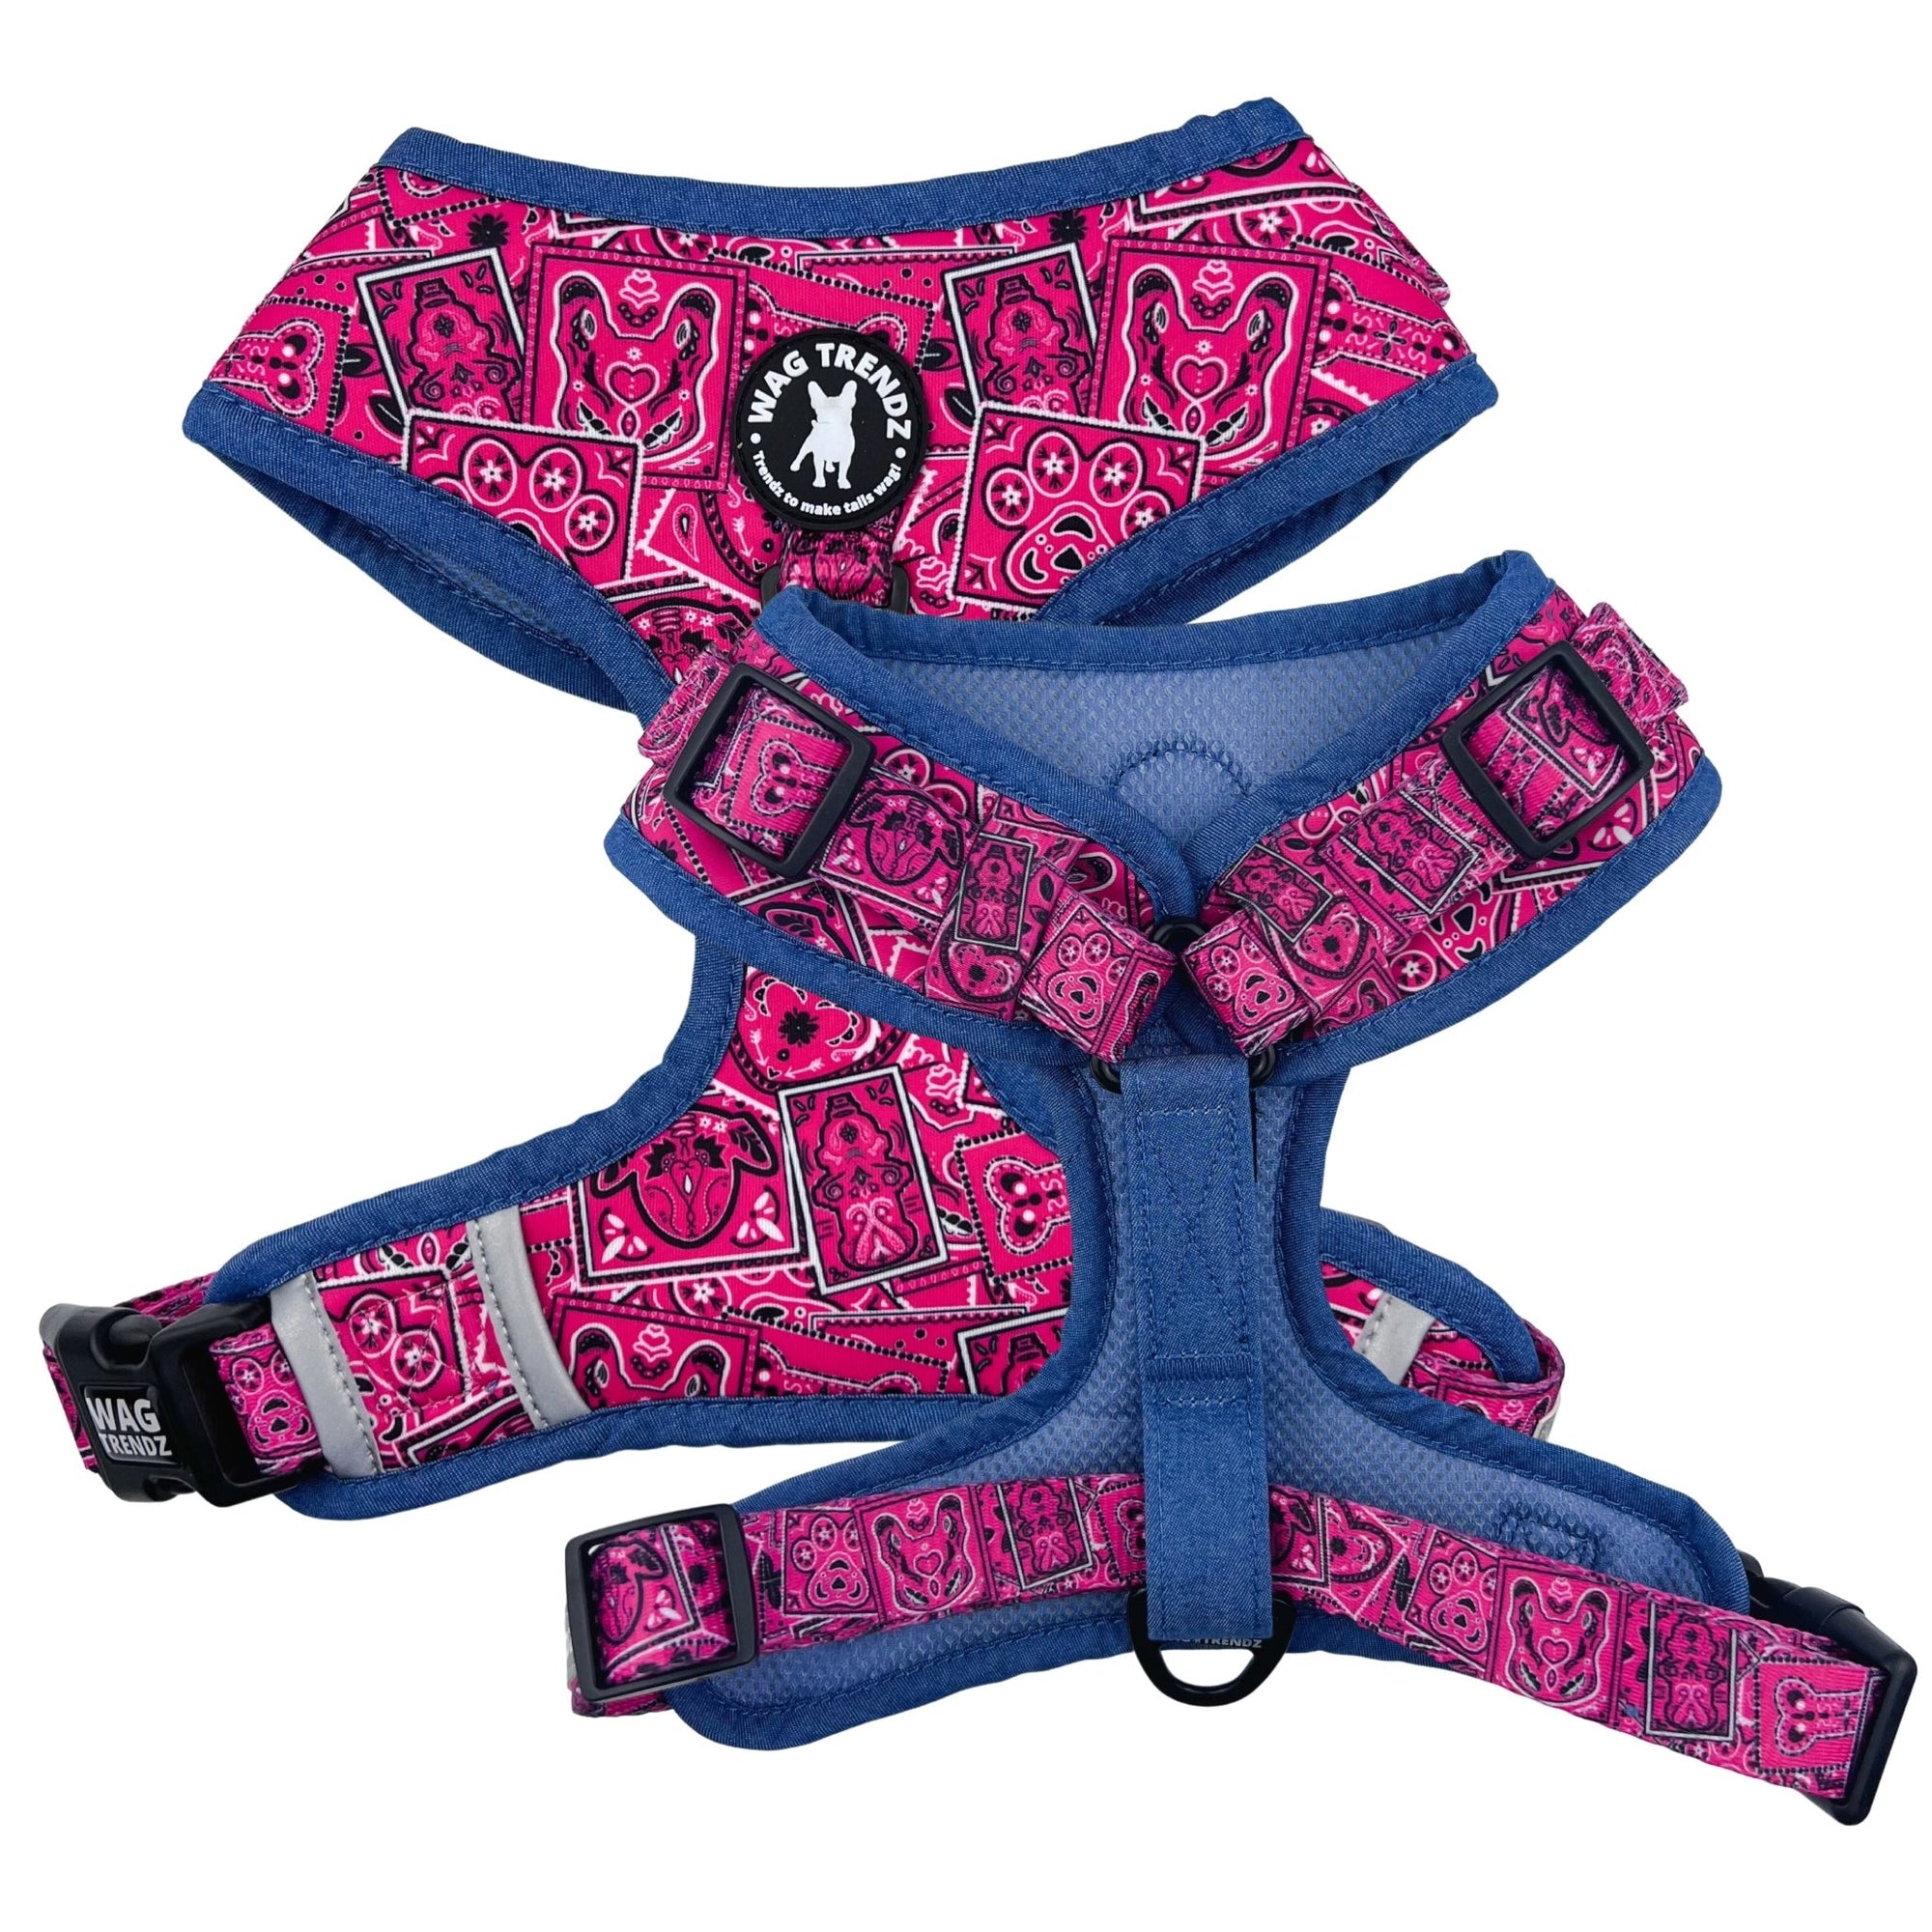 Dog Harness Vest - Adjustable - Bandana Boujee Hot Pink Dog Harness with Denim Accents - chest &amp; back view - against solid white background - Wag Trendz